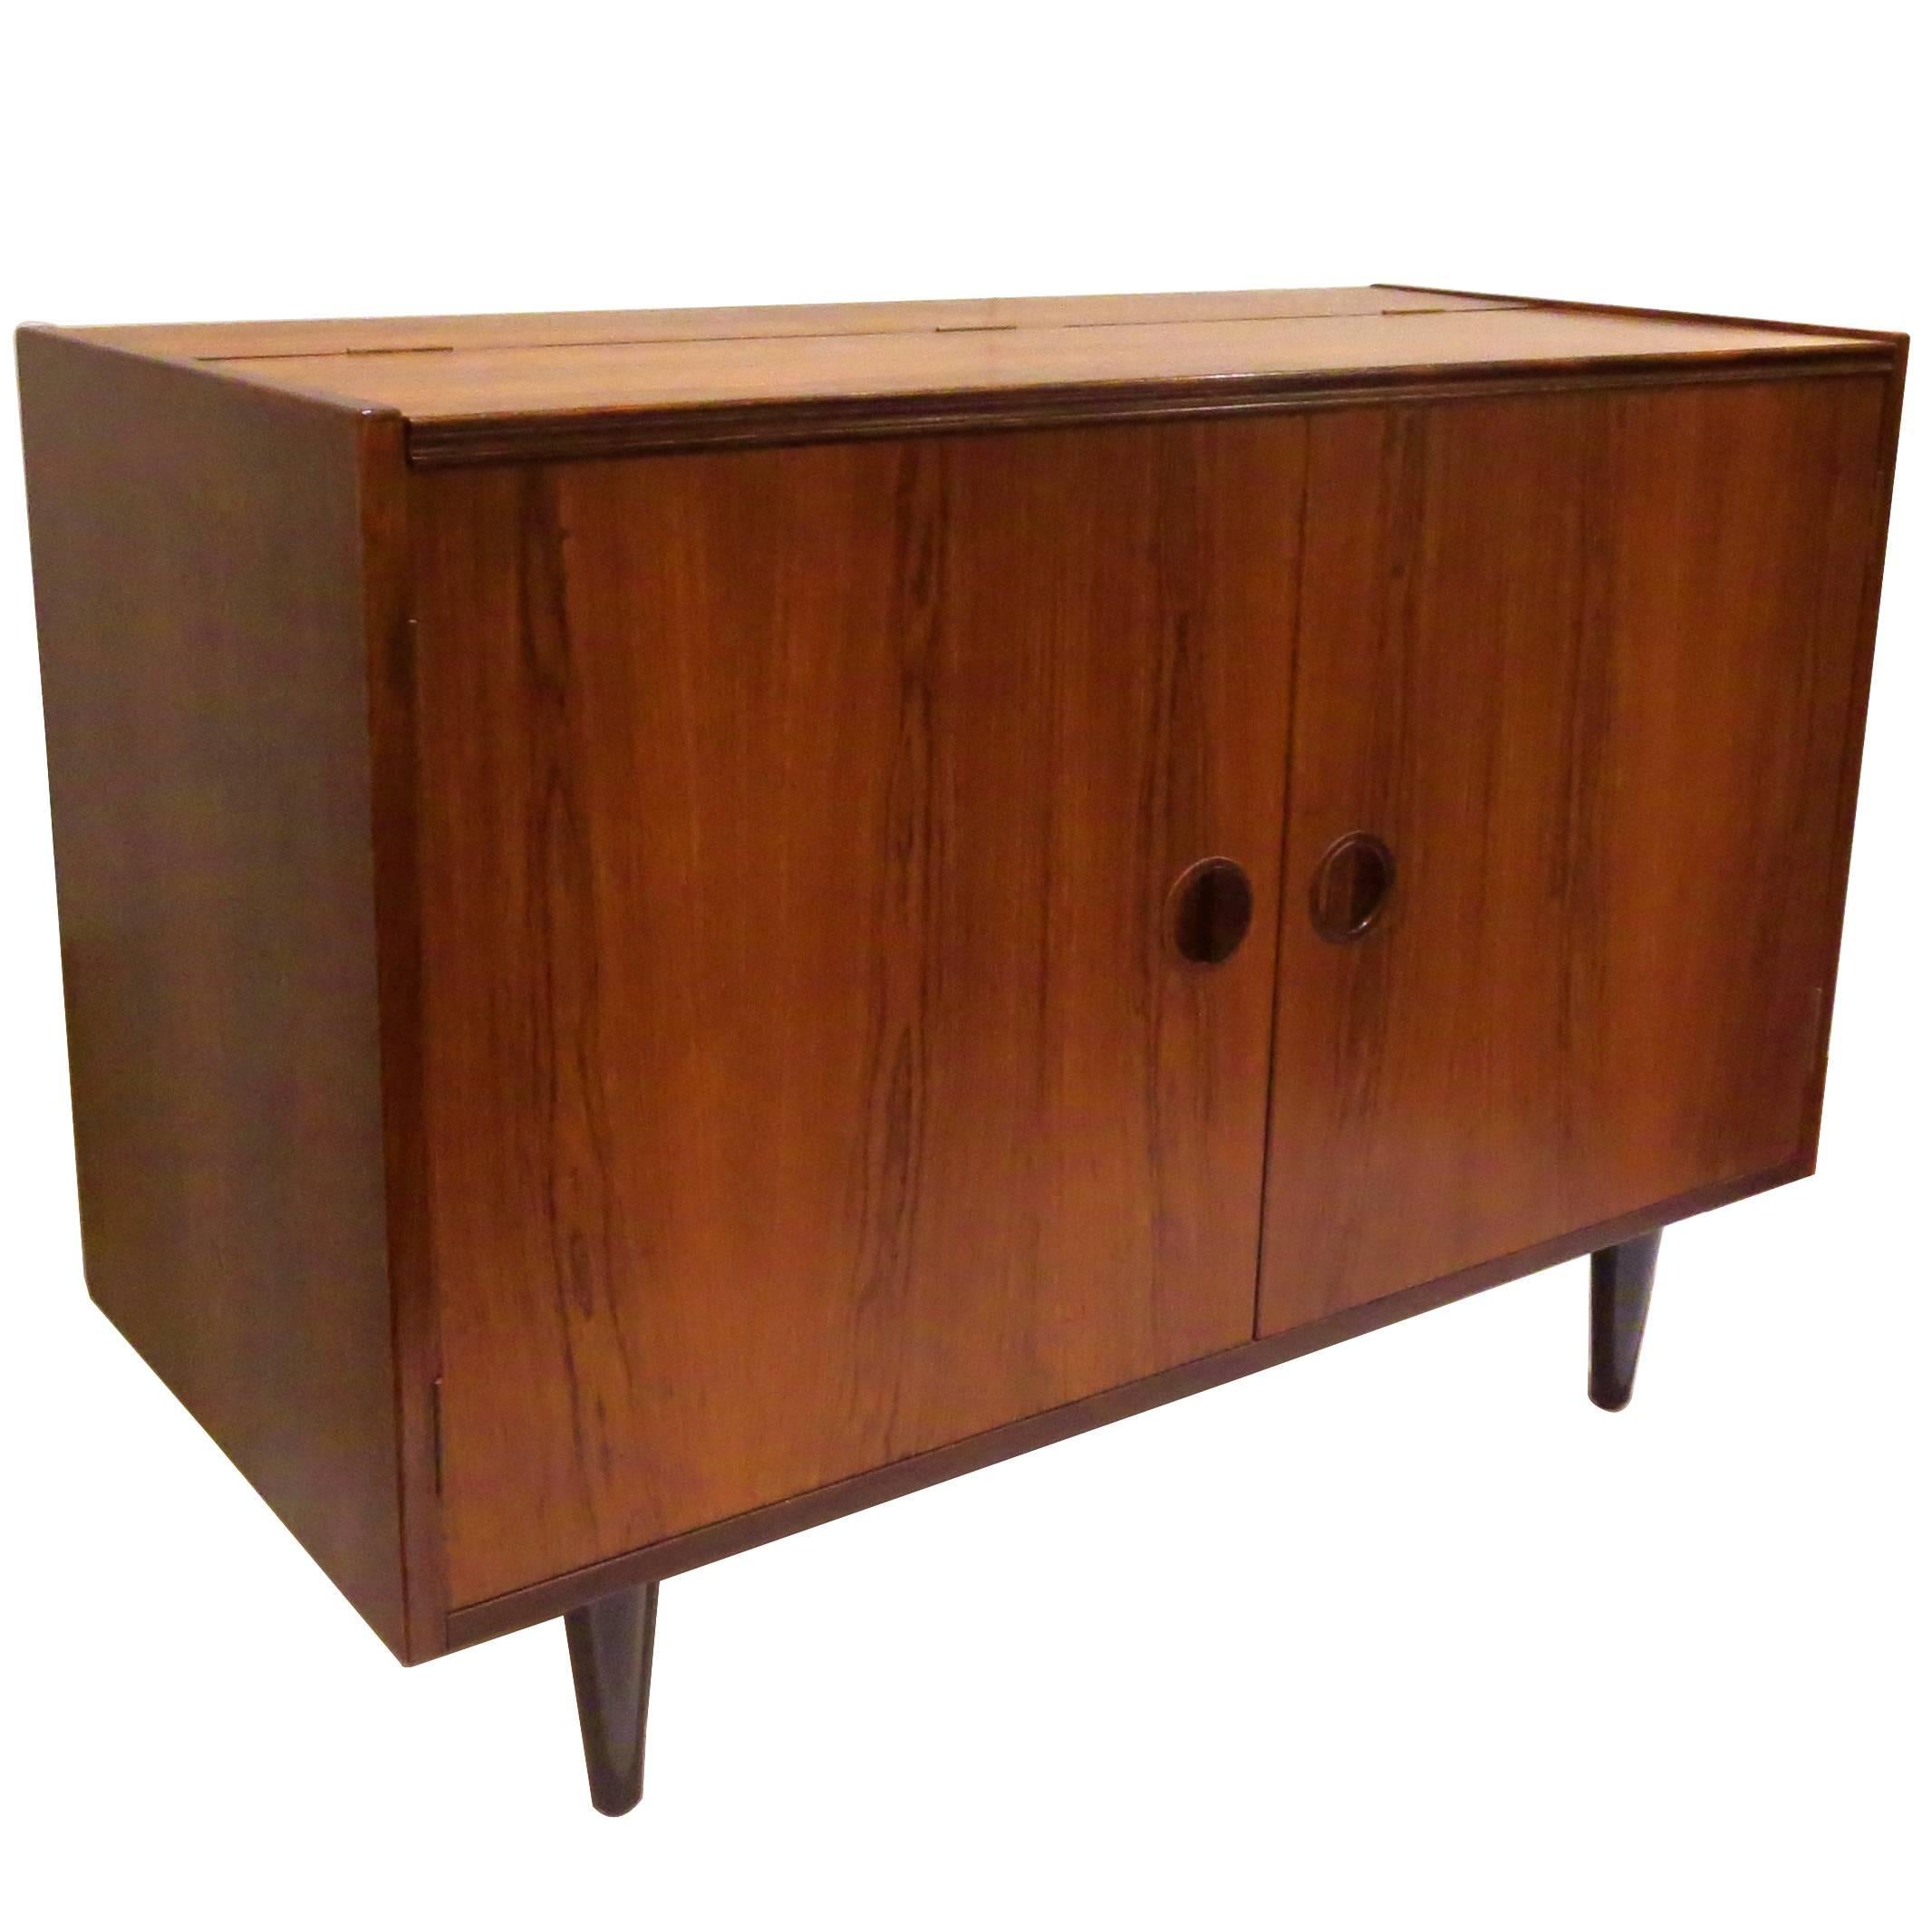 1950s Rosewood Small Double-Door/Lift Top Cabinet by Poul Hundevad